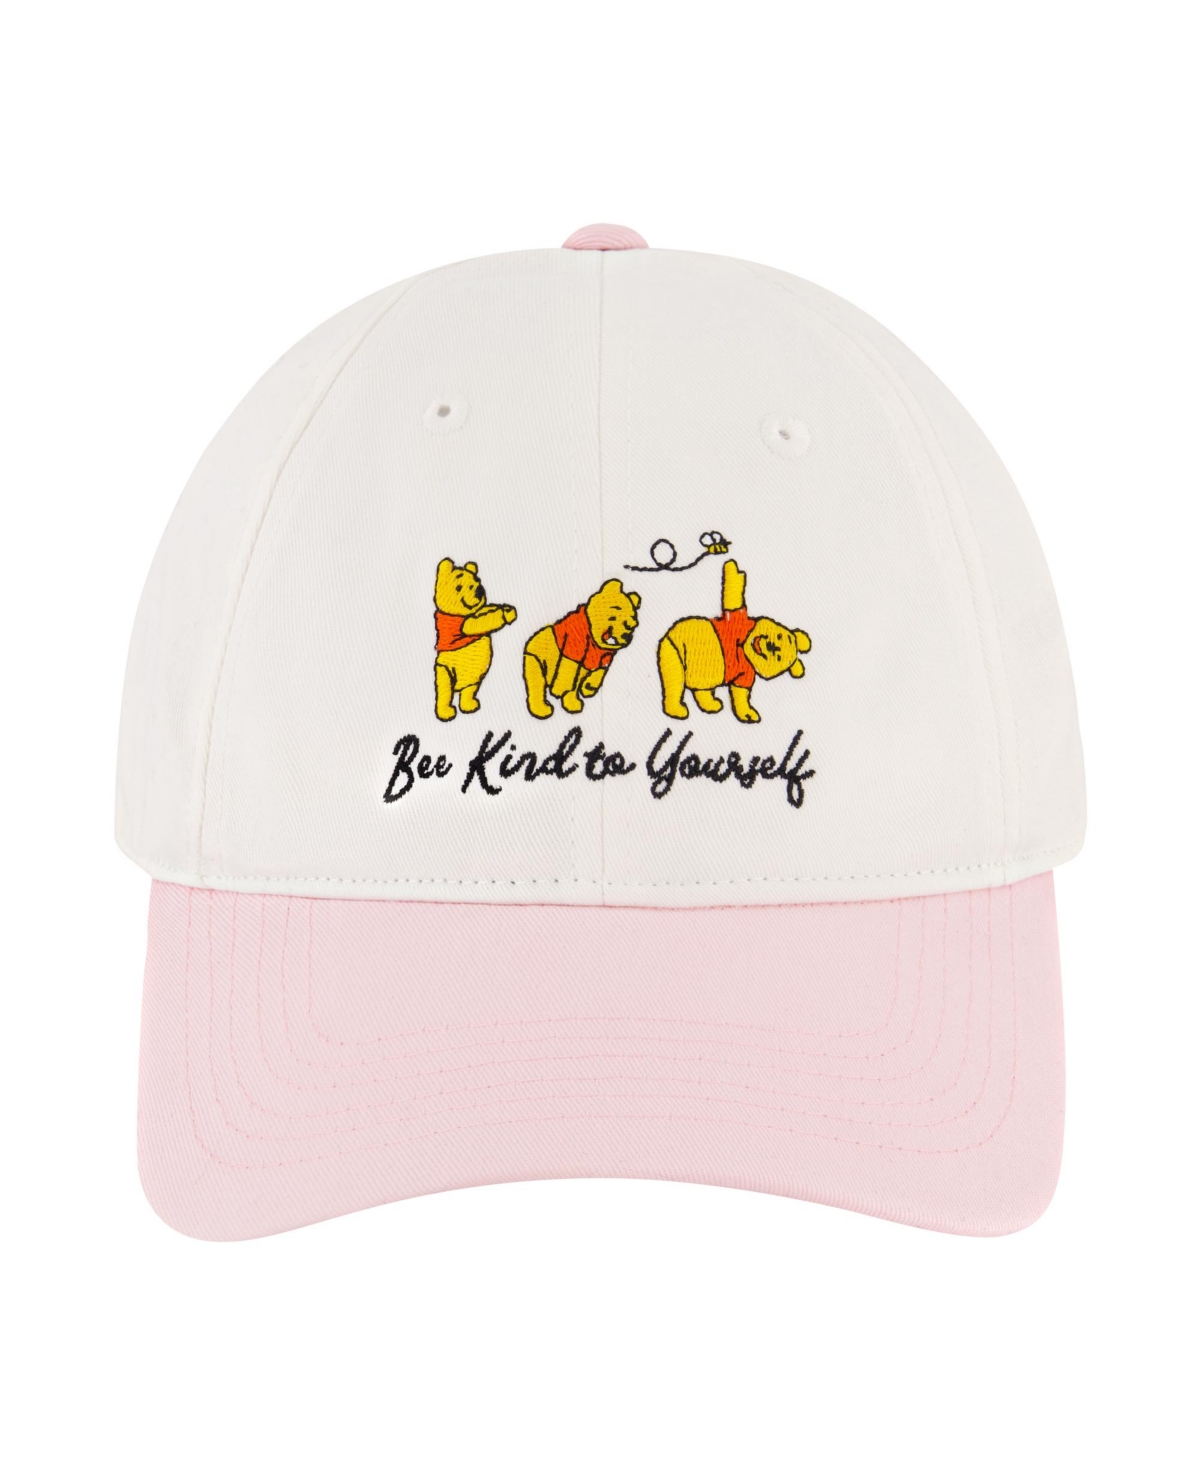 Winnie The Pooh Bee Kind To Yourself Dad Cap - White/pink